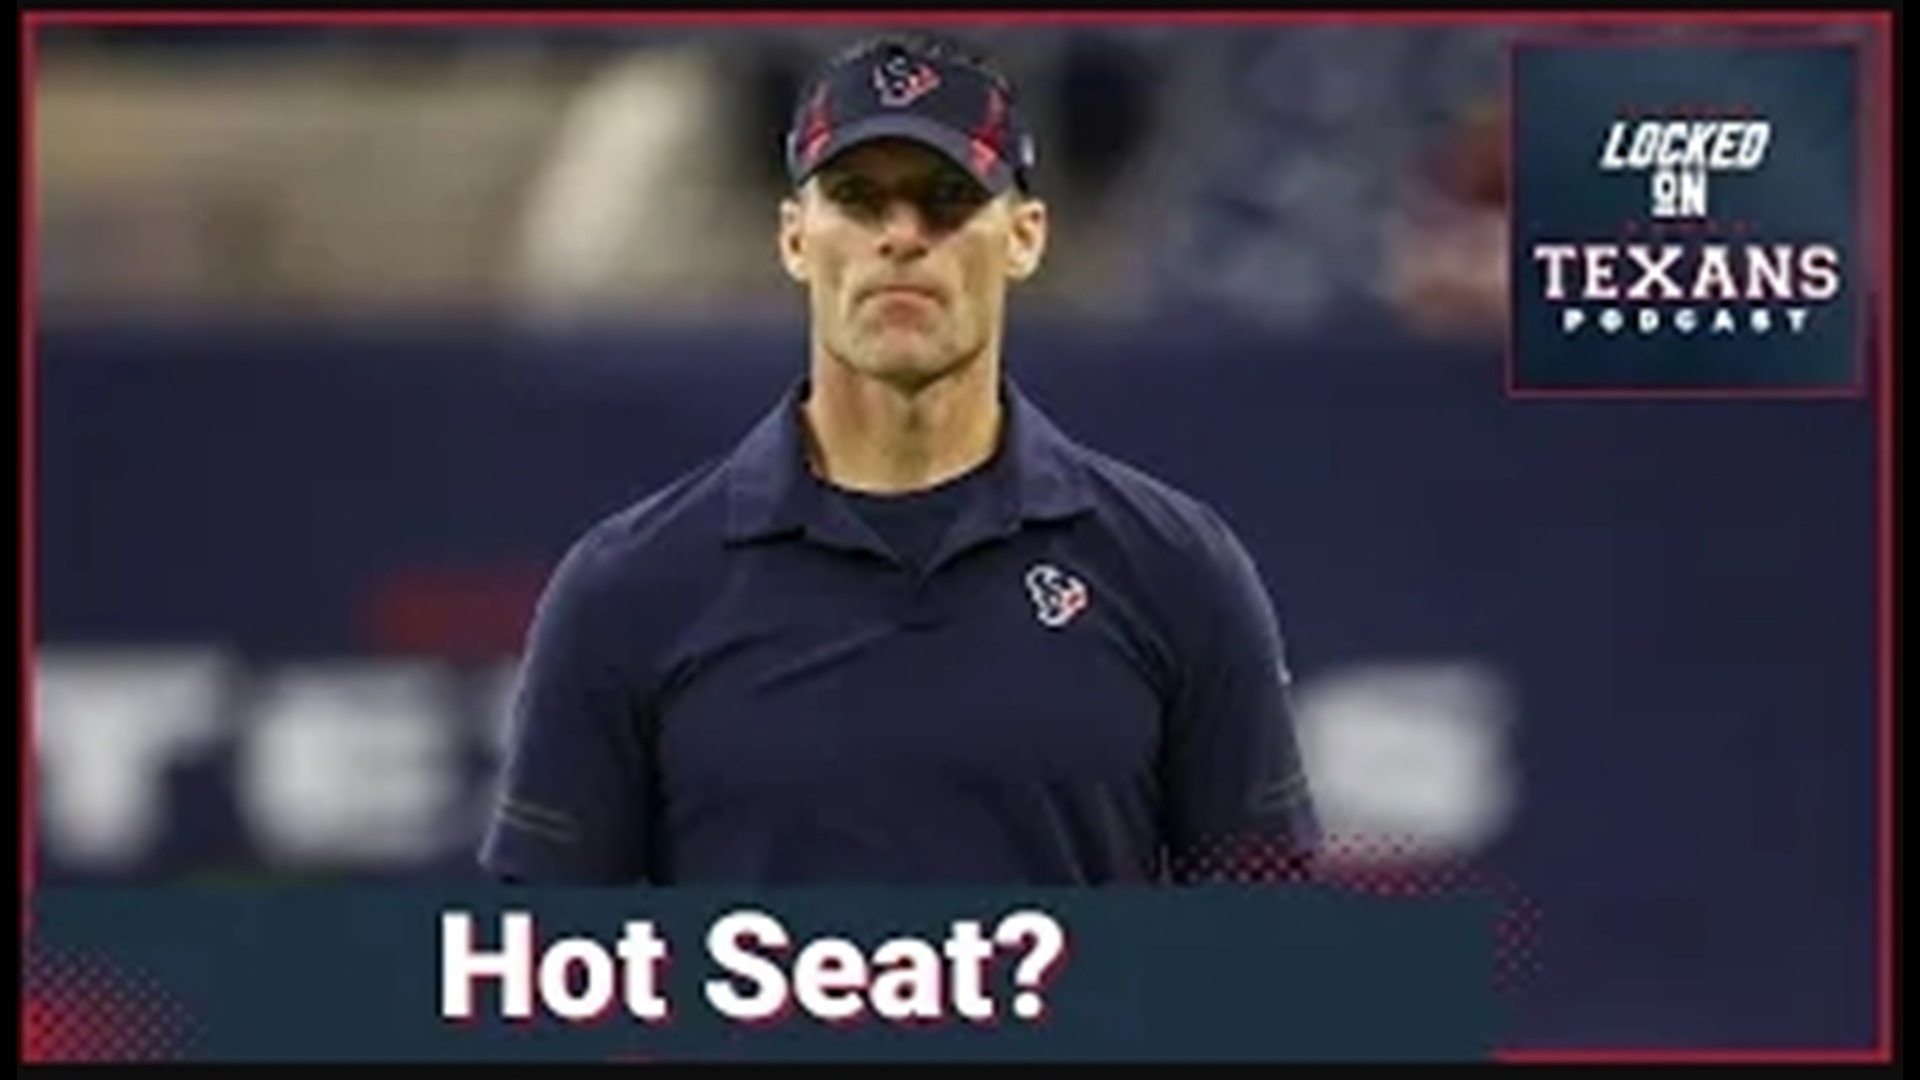 The Houston Texans went the full season without a win at home. Is their general manager on the hot seat?